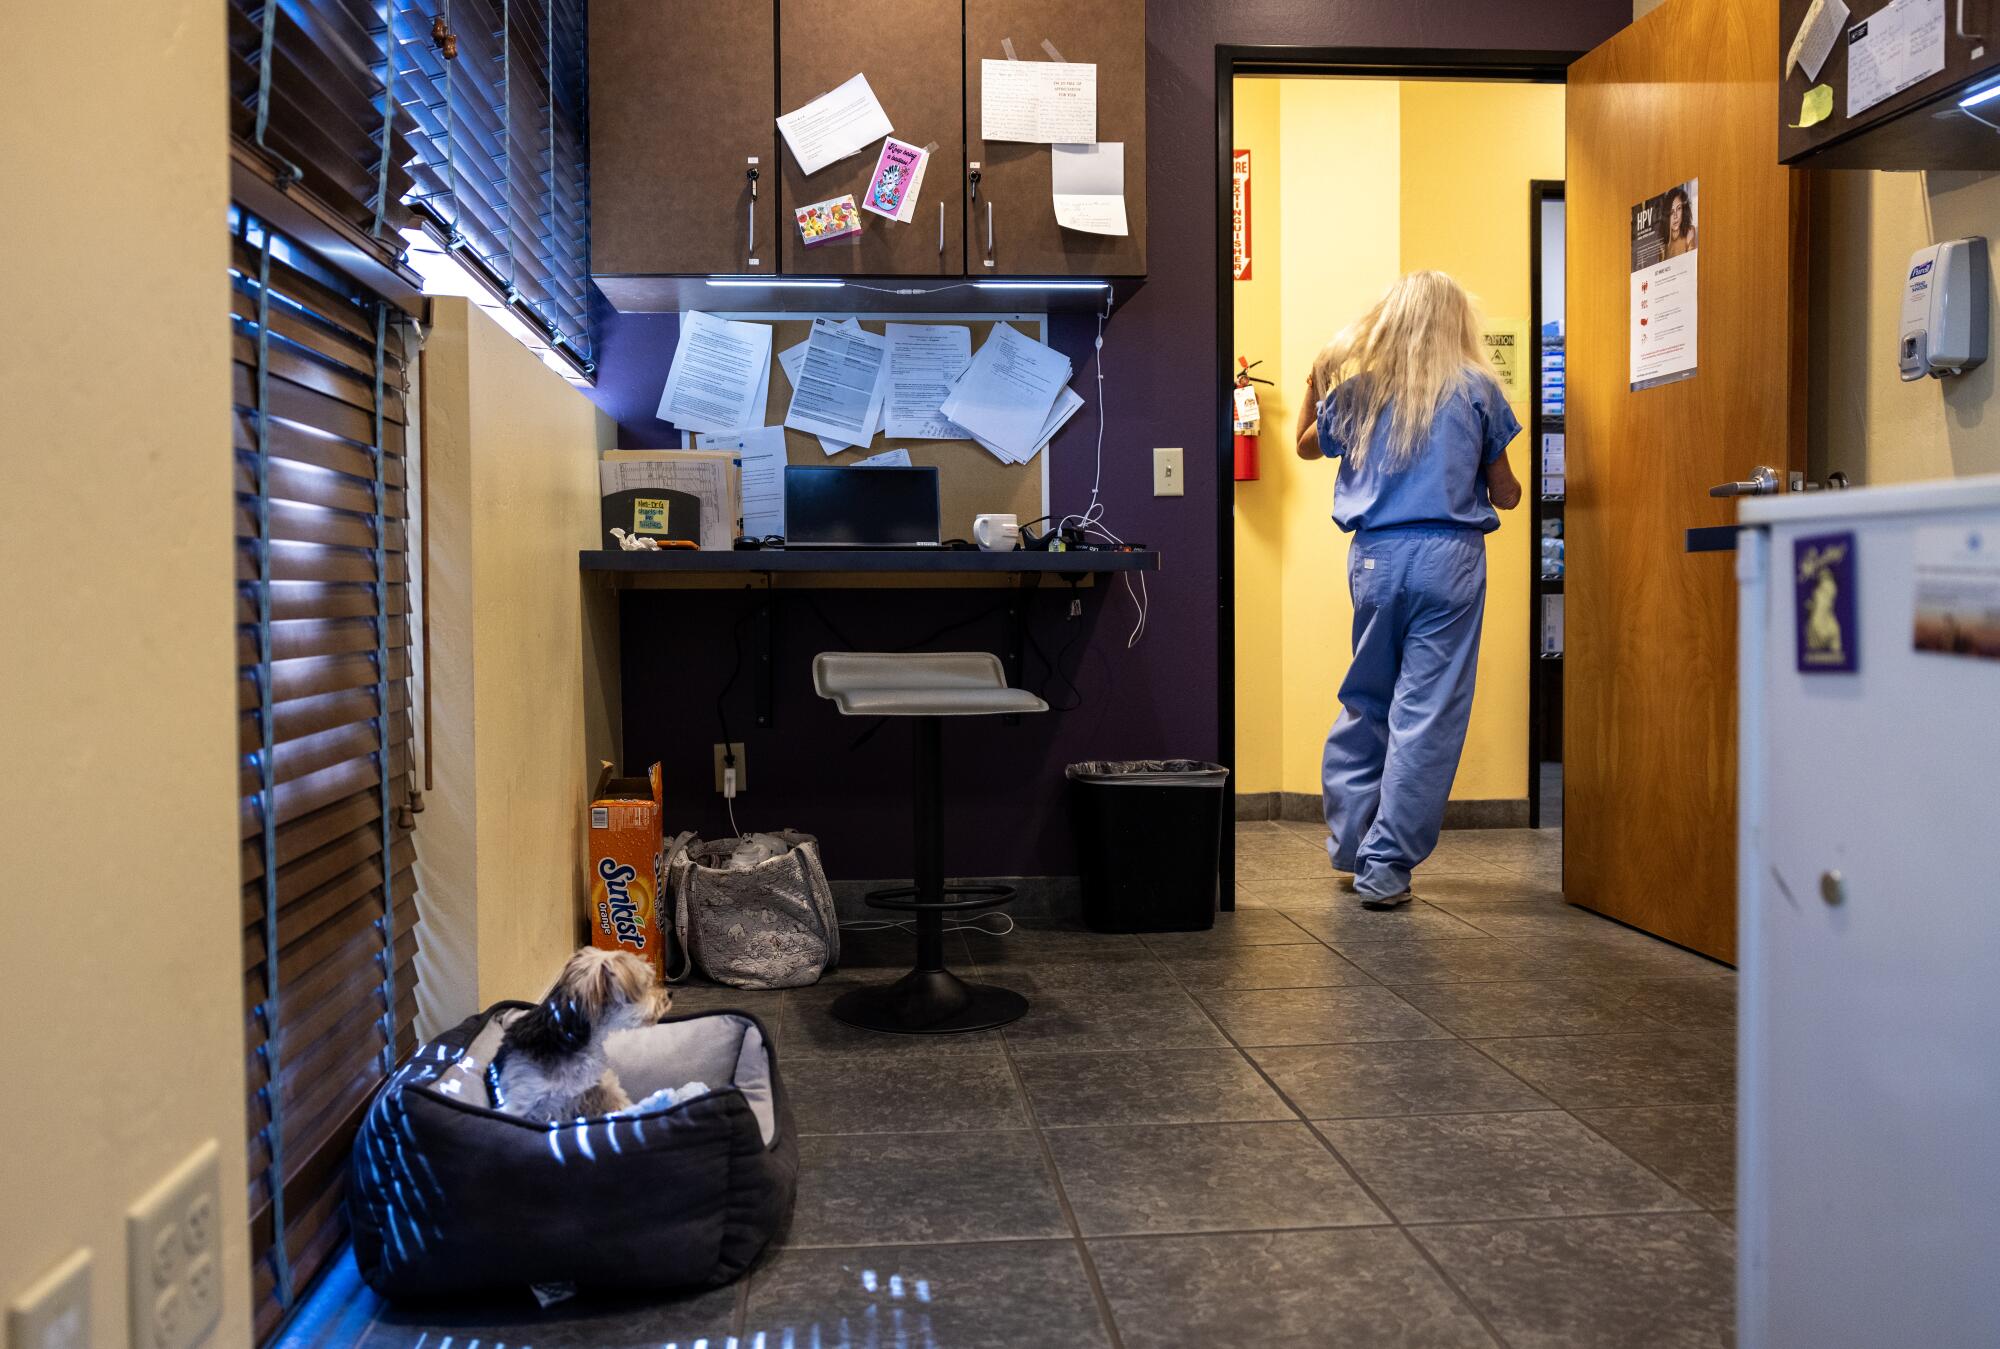 With her support dog Scooter staying in his bed, Dr. Barbara Zipkin rushes to an exam room at Camelback Family Planning.